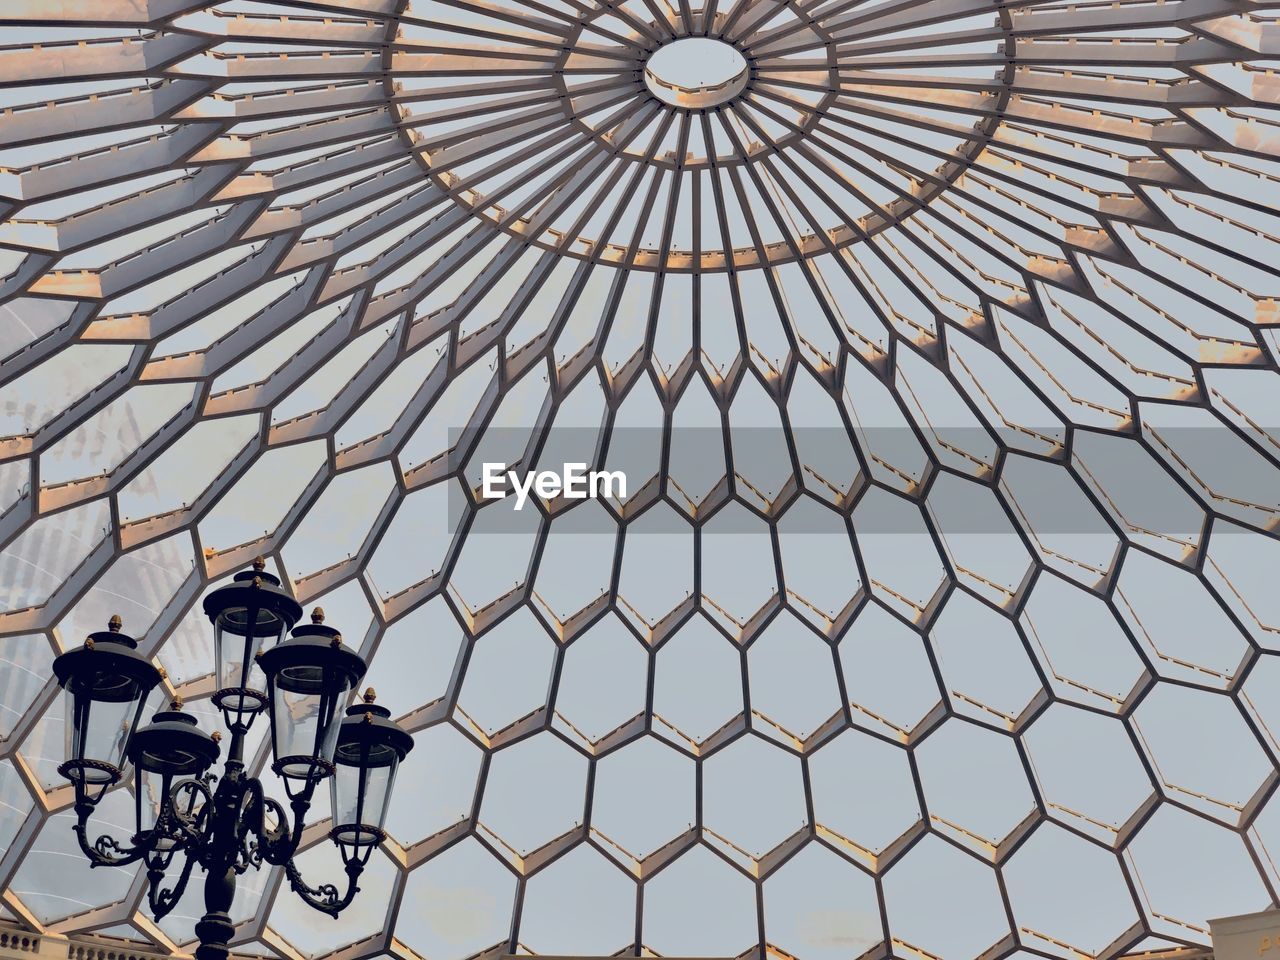 LOW ANGLE VIEW OF BICYCLE WHEEL WITH CEILING